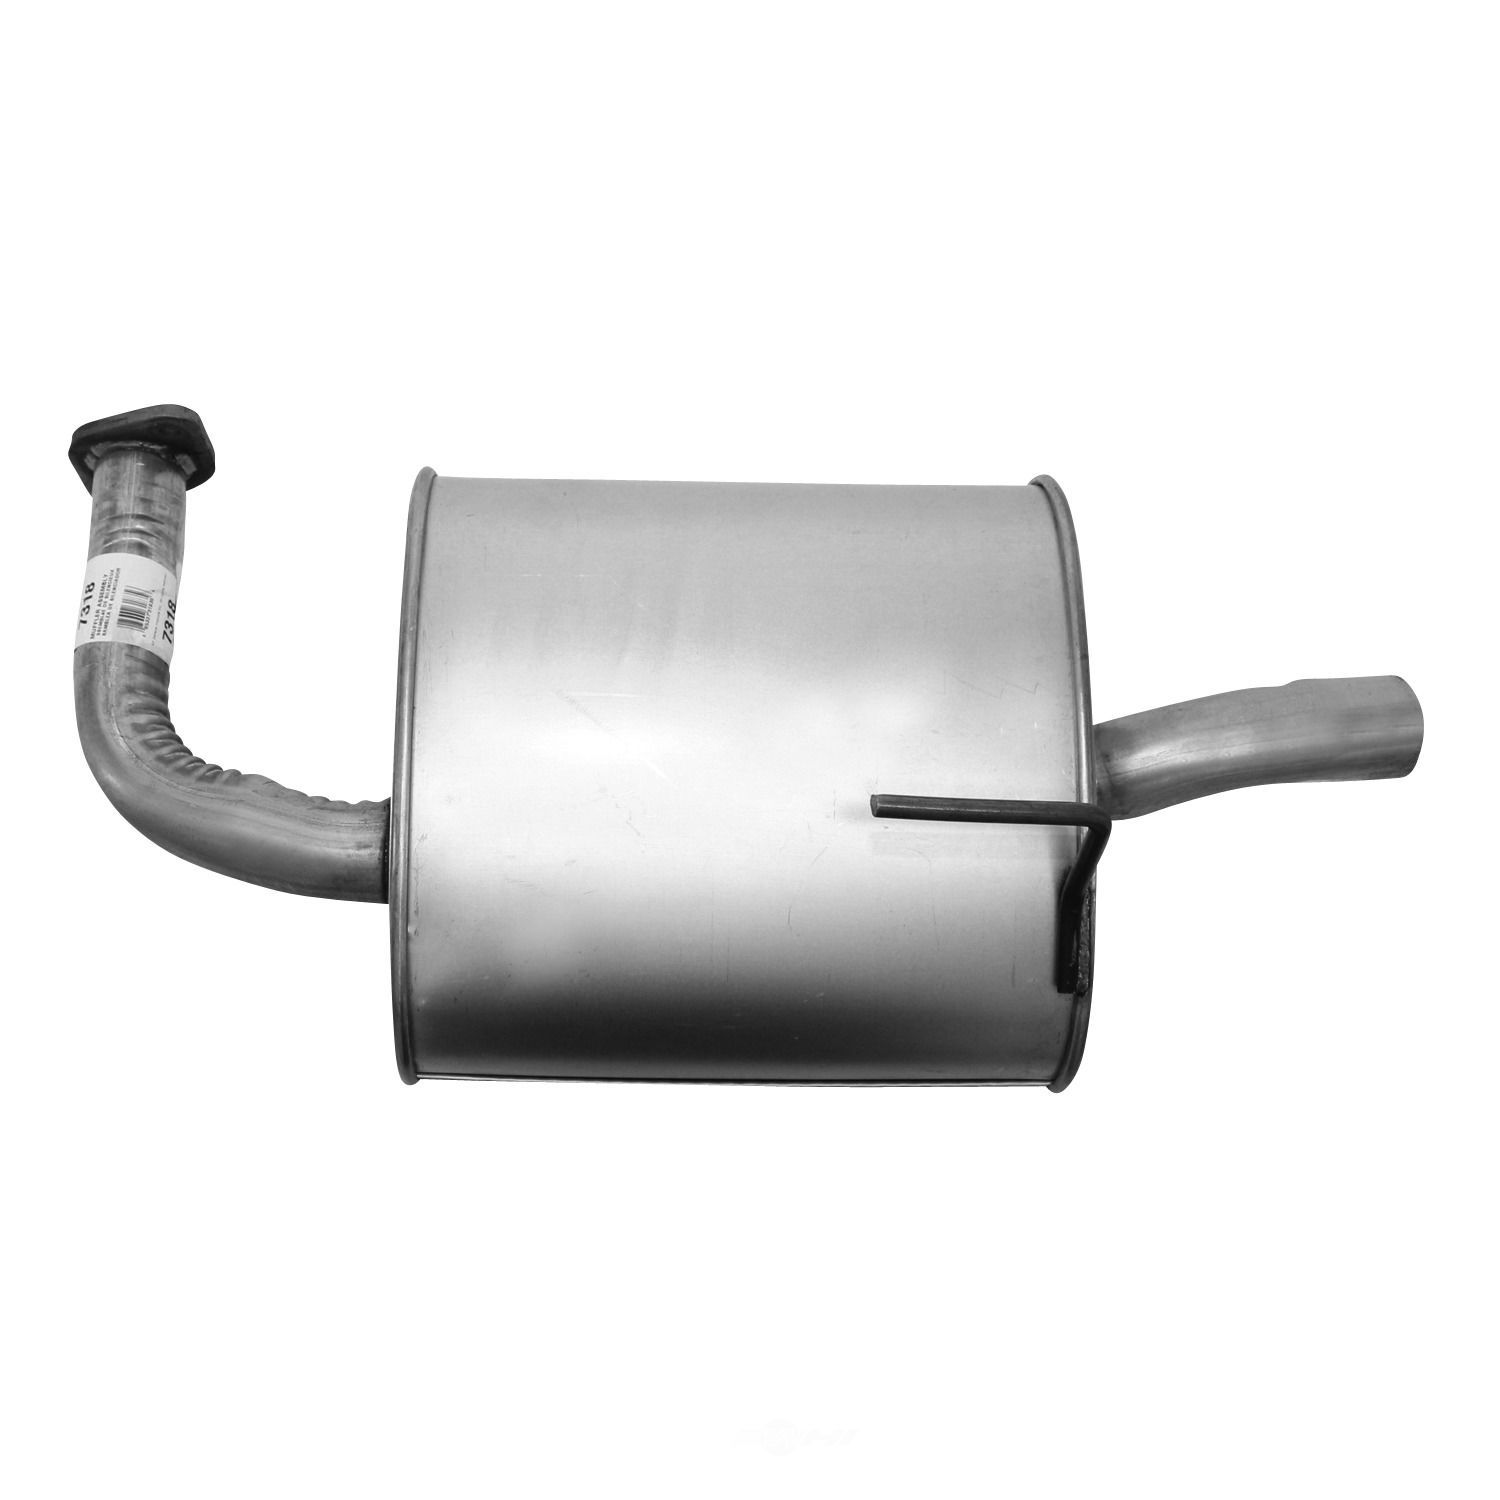 AP EXHAUST W/FEDERAL CONVERTER - Welded Assembly - APF 7318